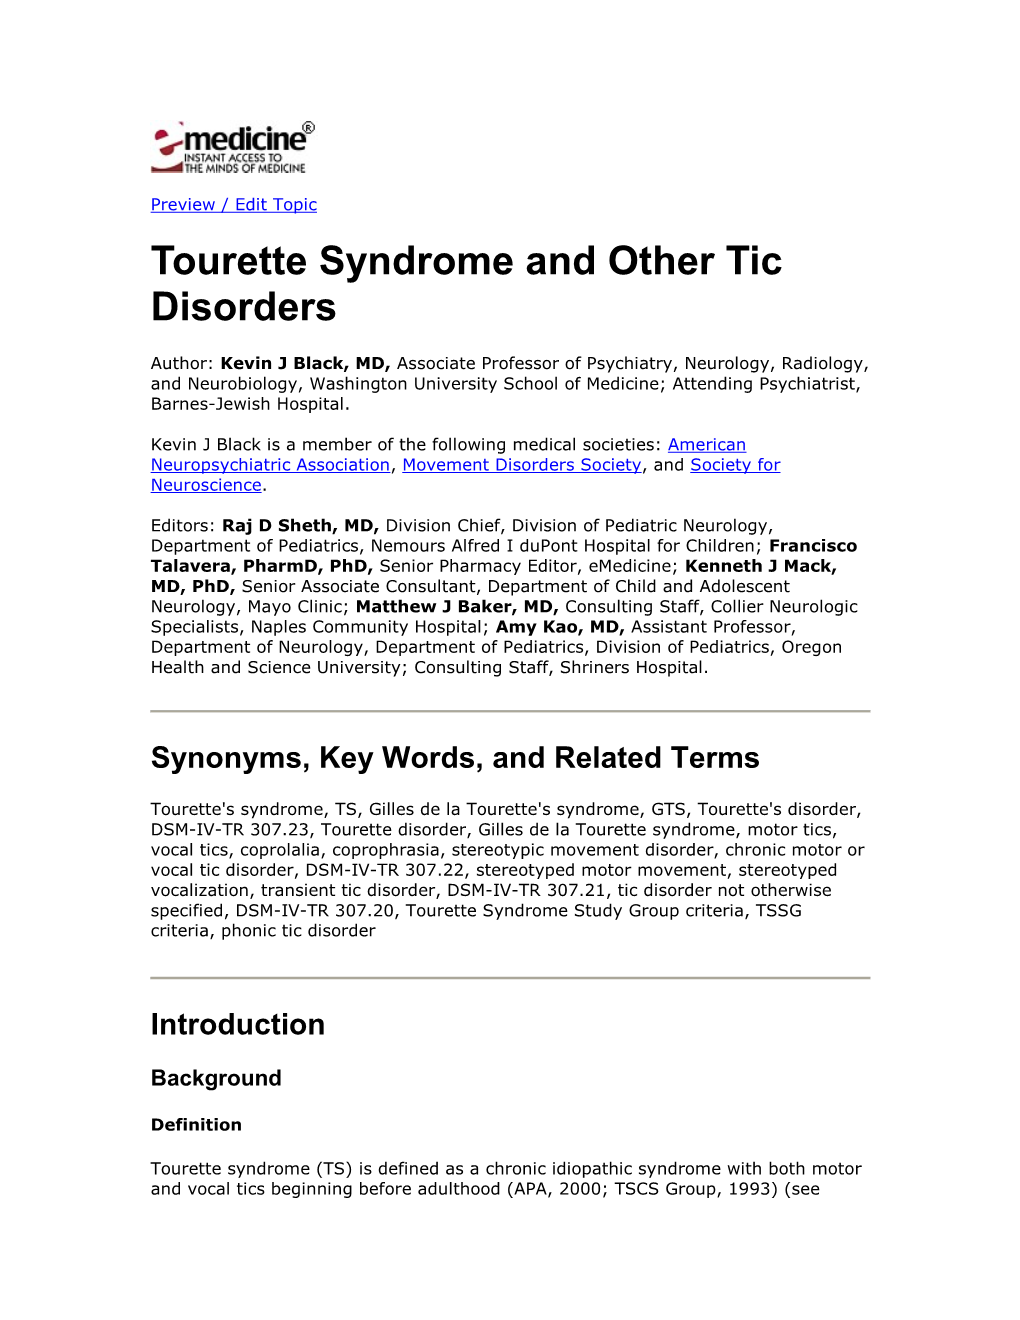 Tourette Syndrome and Other Tic Disorders